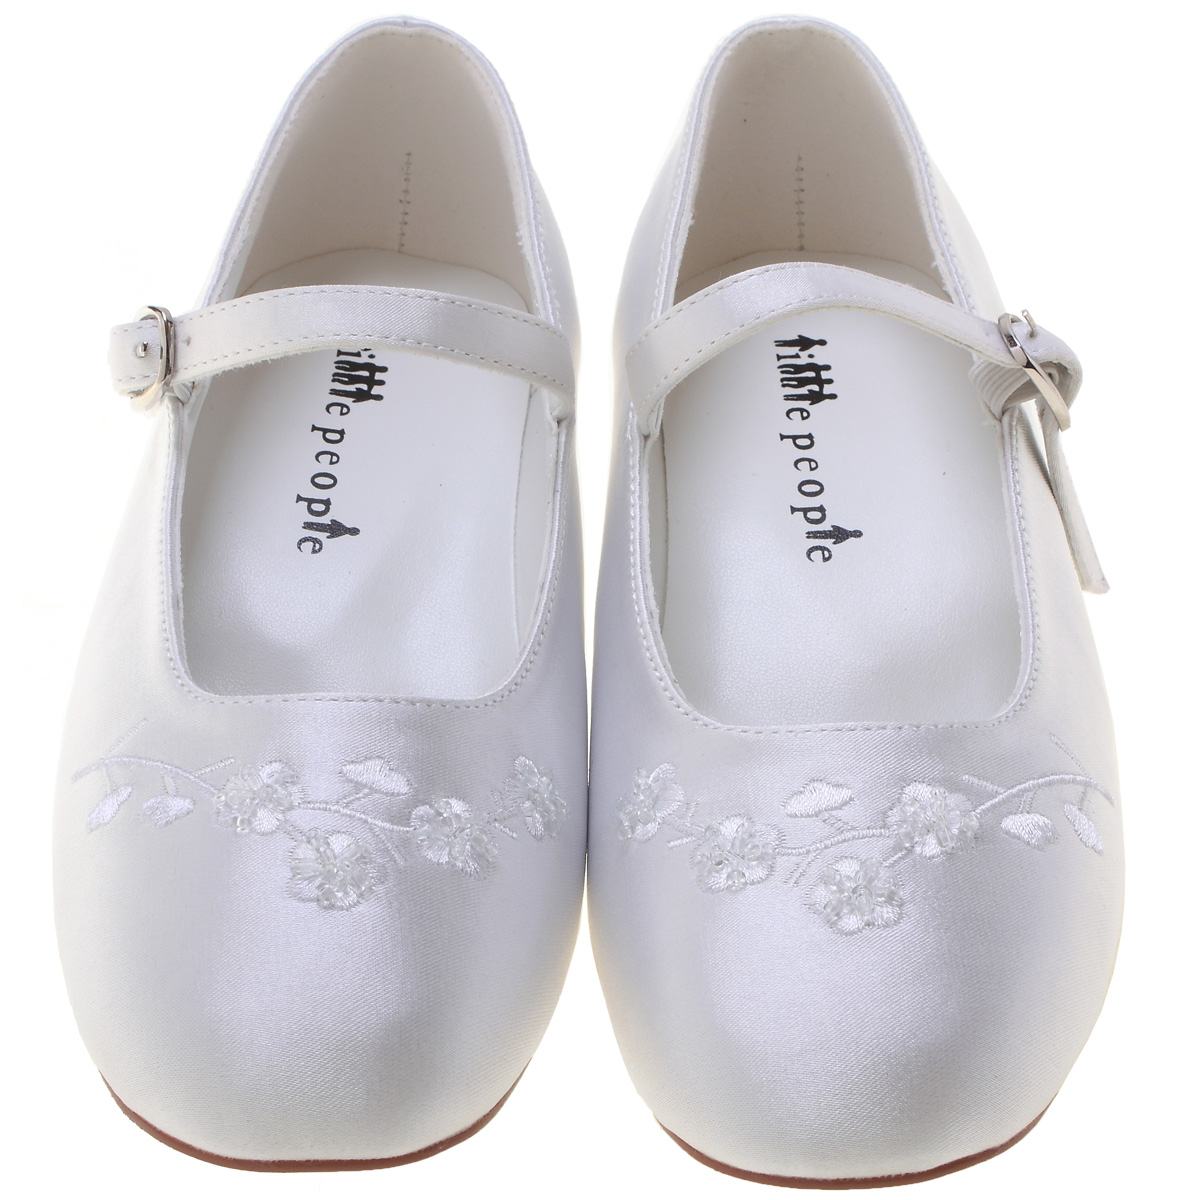 Little People First Holy Communion Shoes For Girls Style 4850